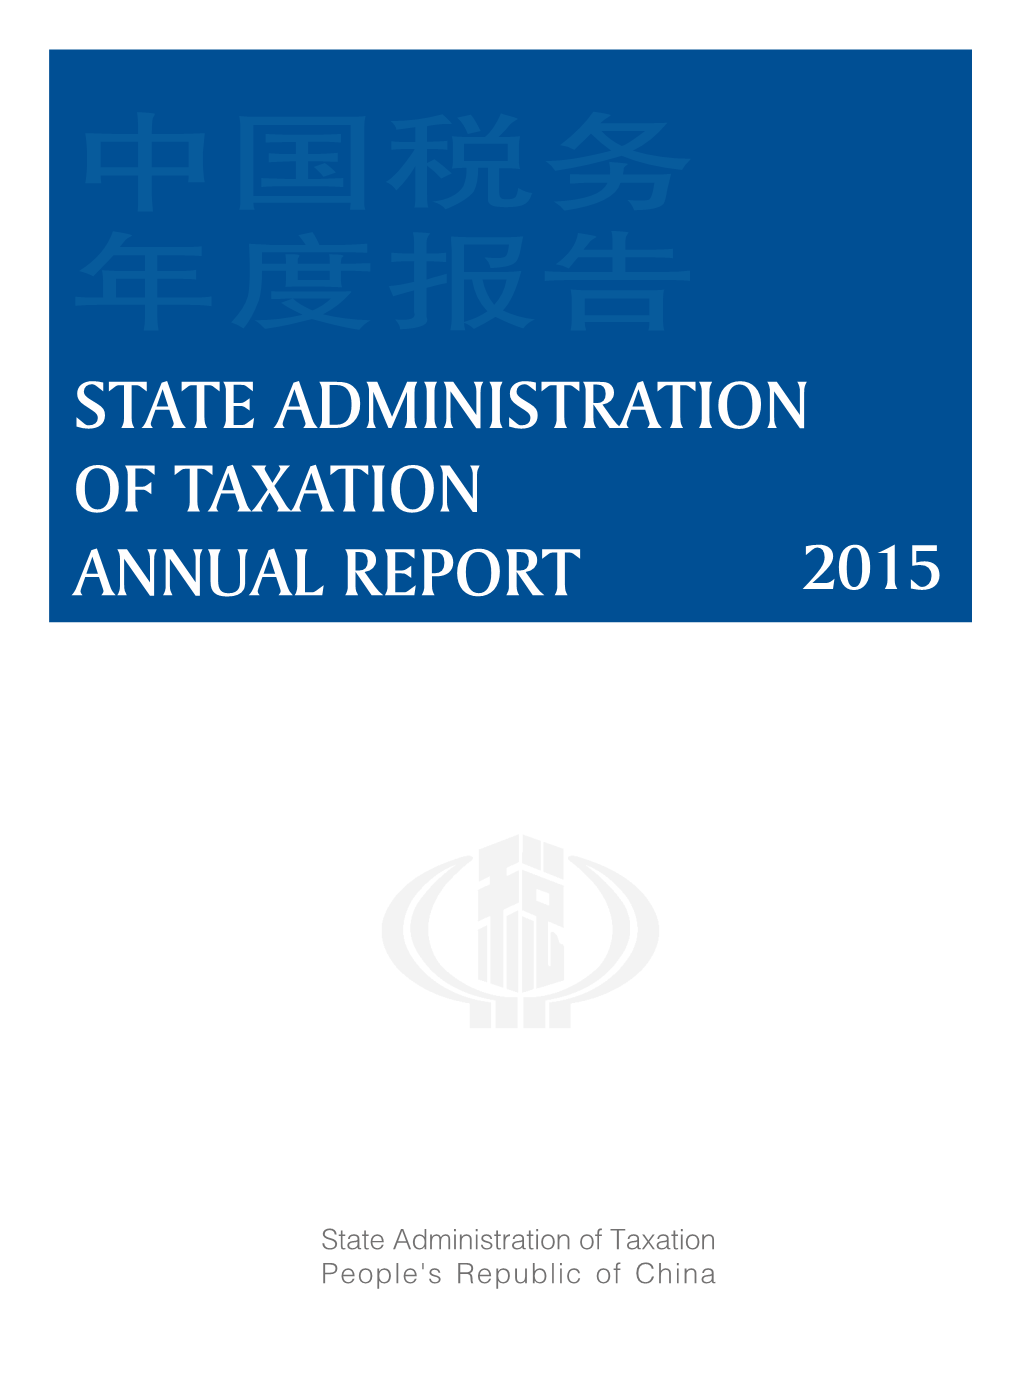 State Administration of Taxation Annual Report 2015